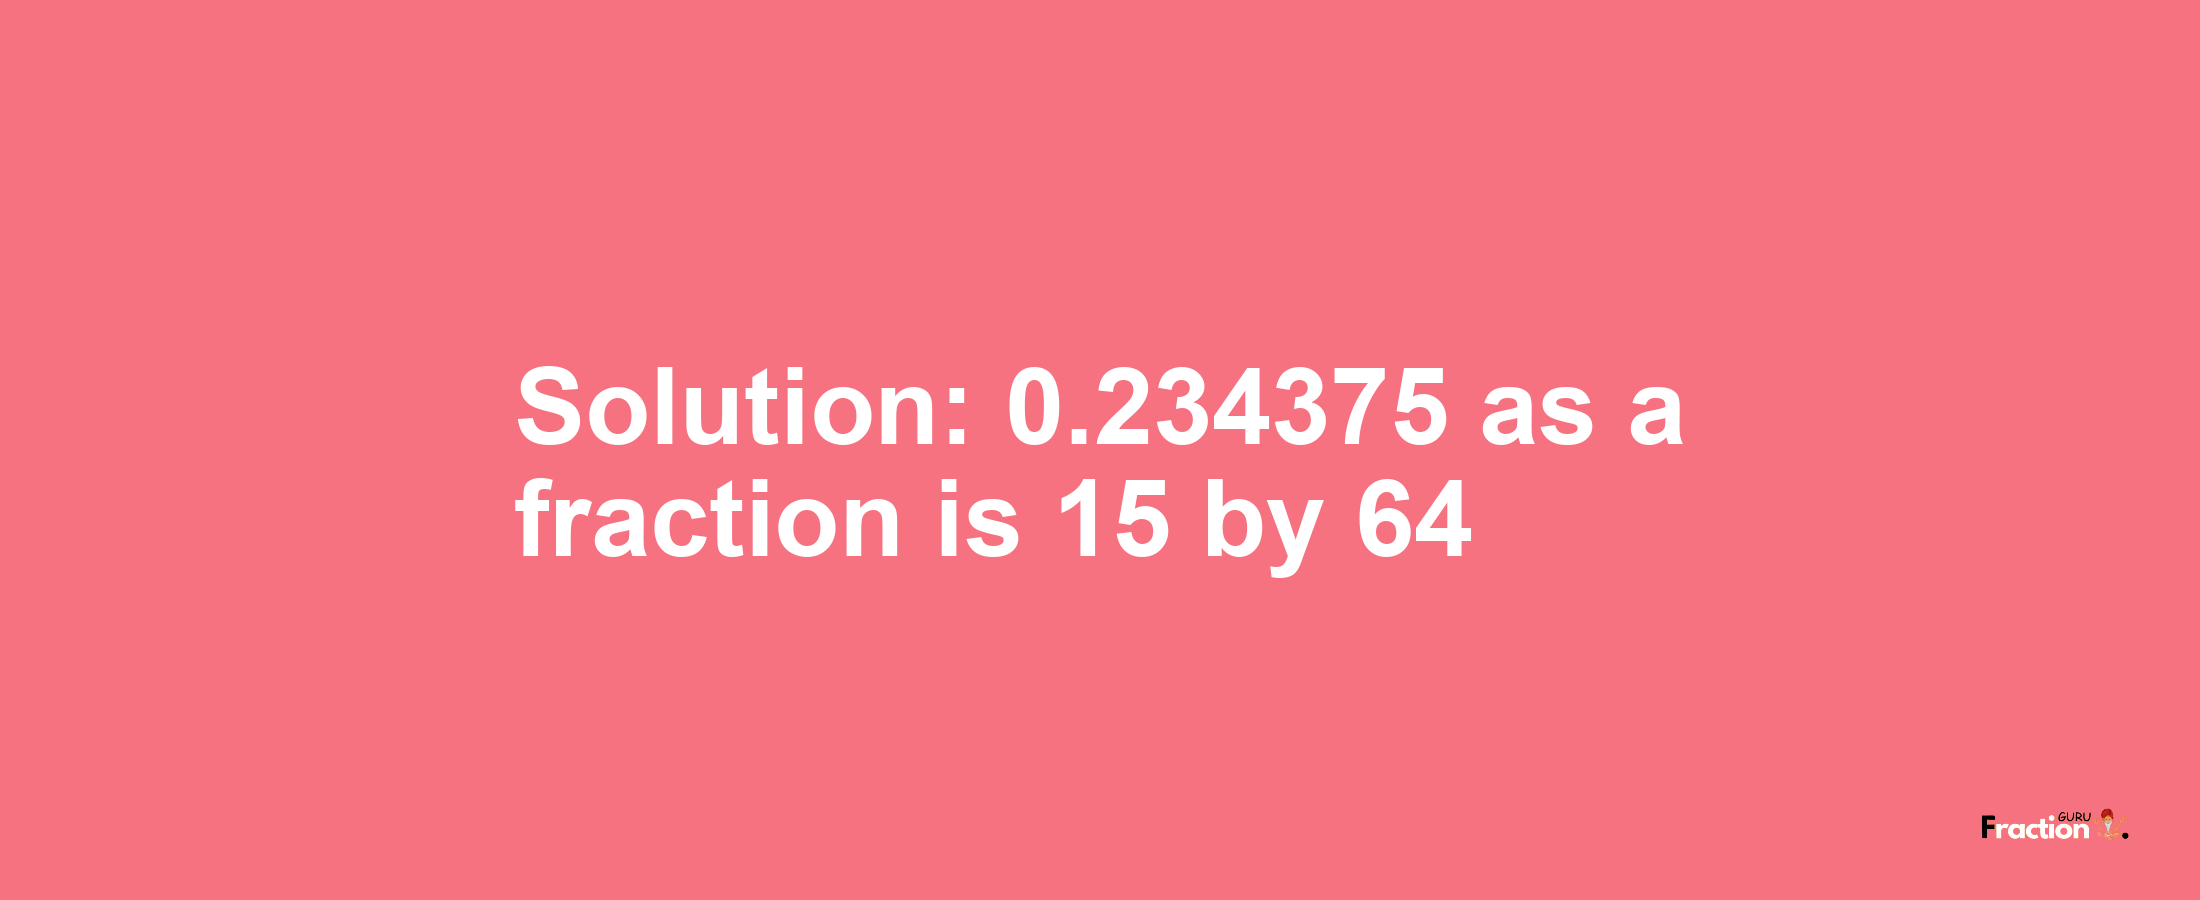 Solution:0.234375 as a fraction is 15/64